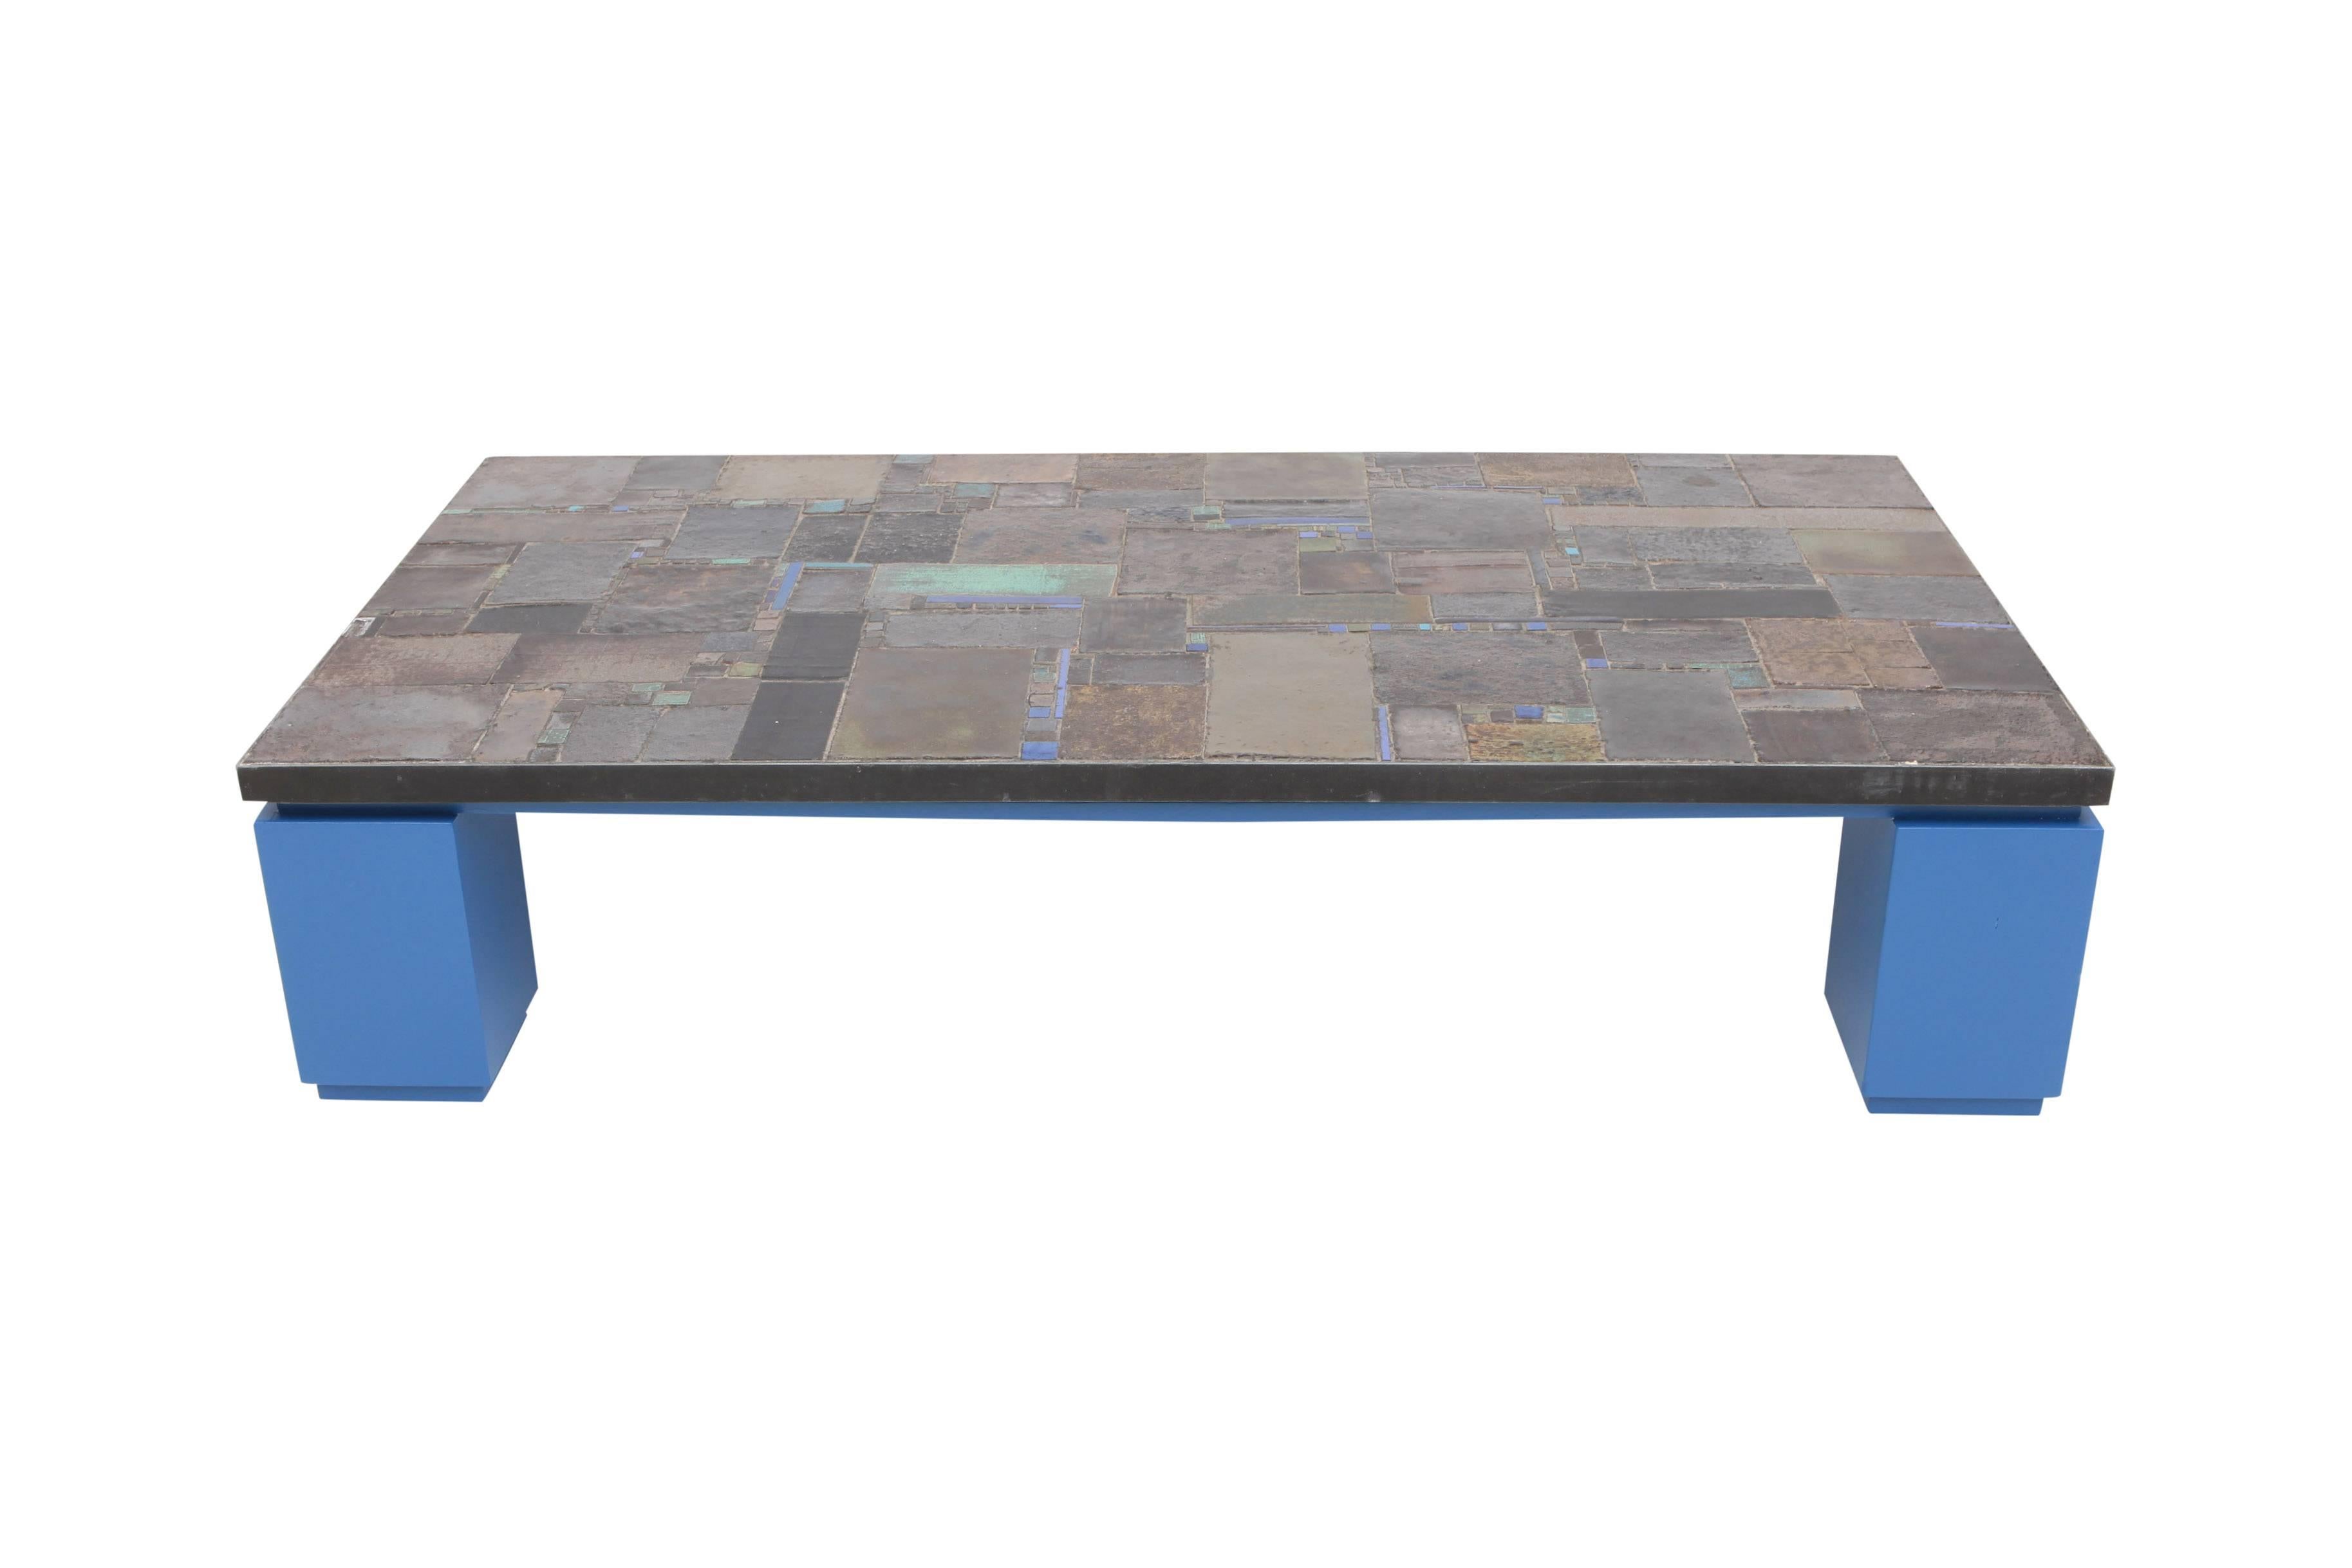 Ceramic tile coffee table by Pia Manu,
mounted on blue lacquered base, Belgium, 1960s

Pia Manu is a workshop from Ingelmunster, Belgium where Jules Dewaele, and later his son Koen Dewaele worked during the 1960s until now, working with natural